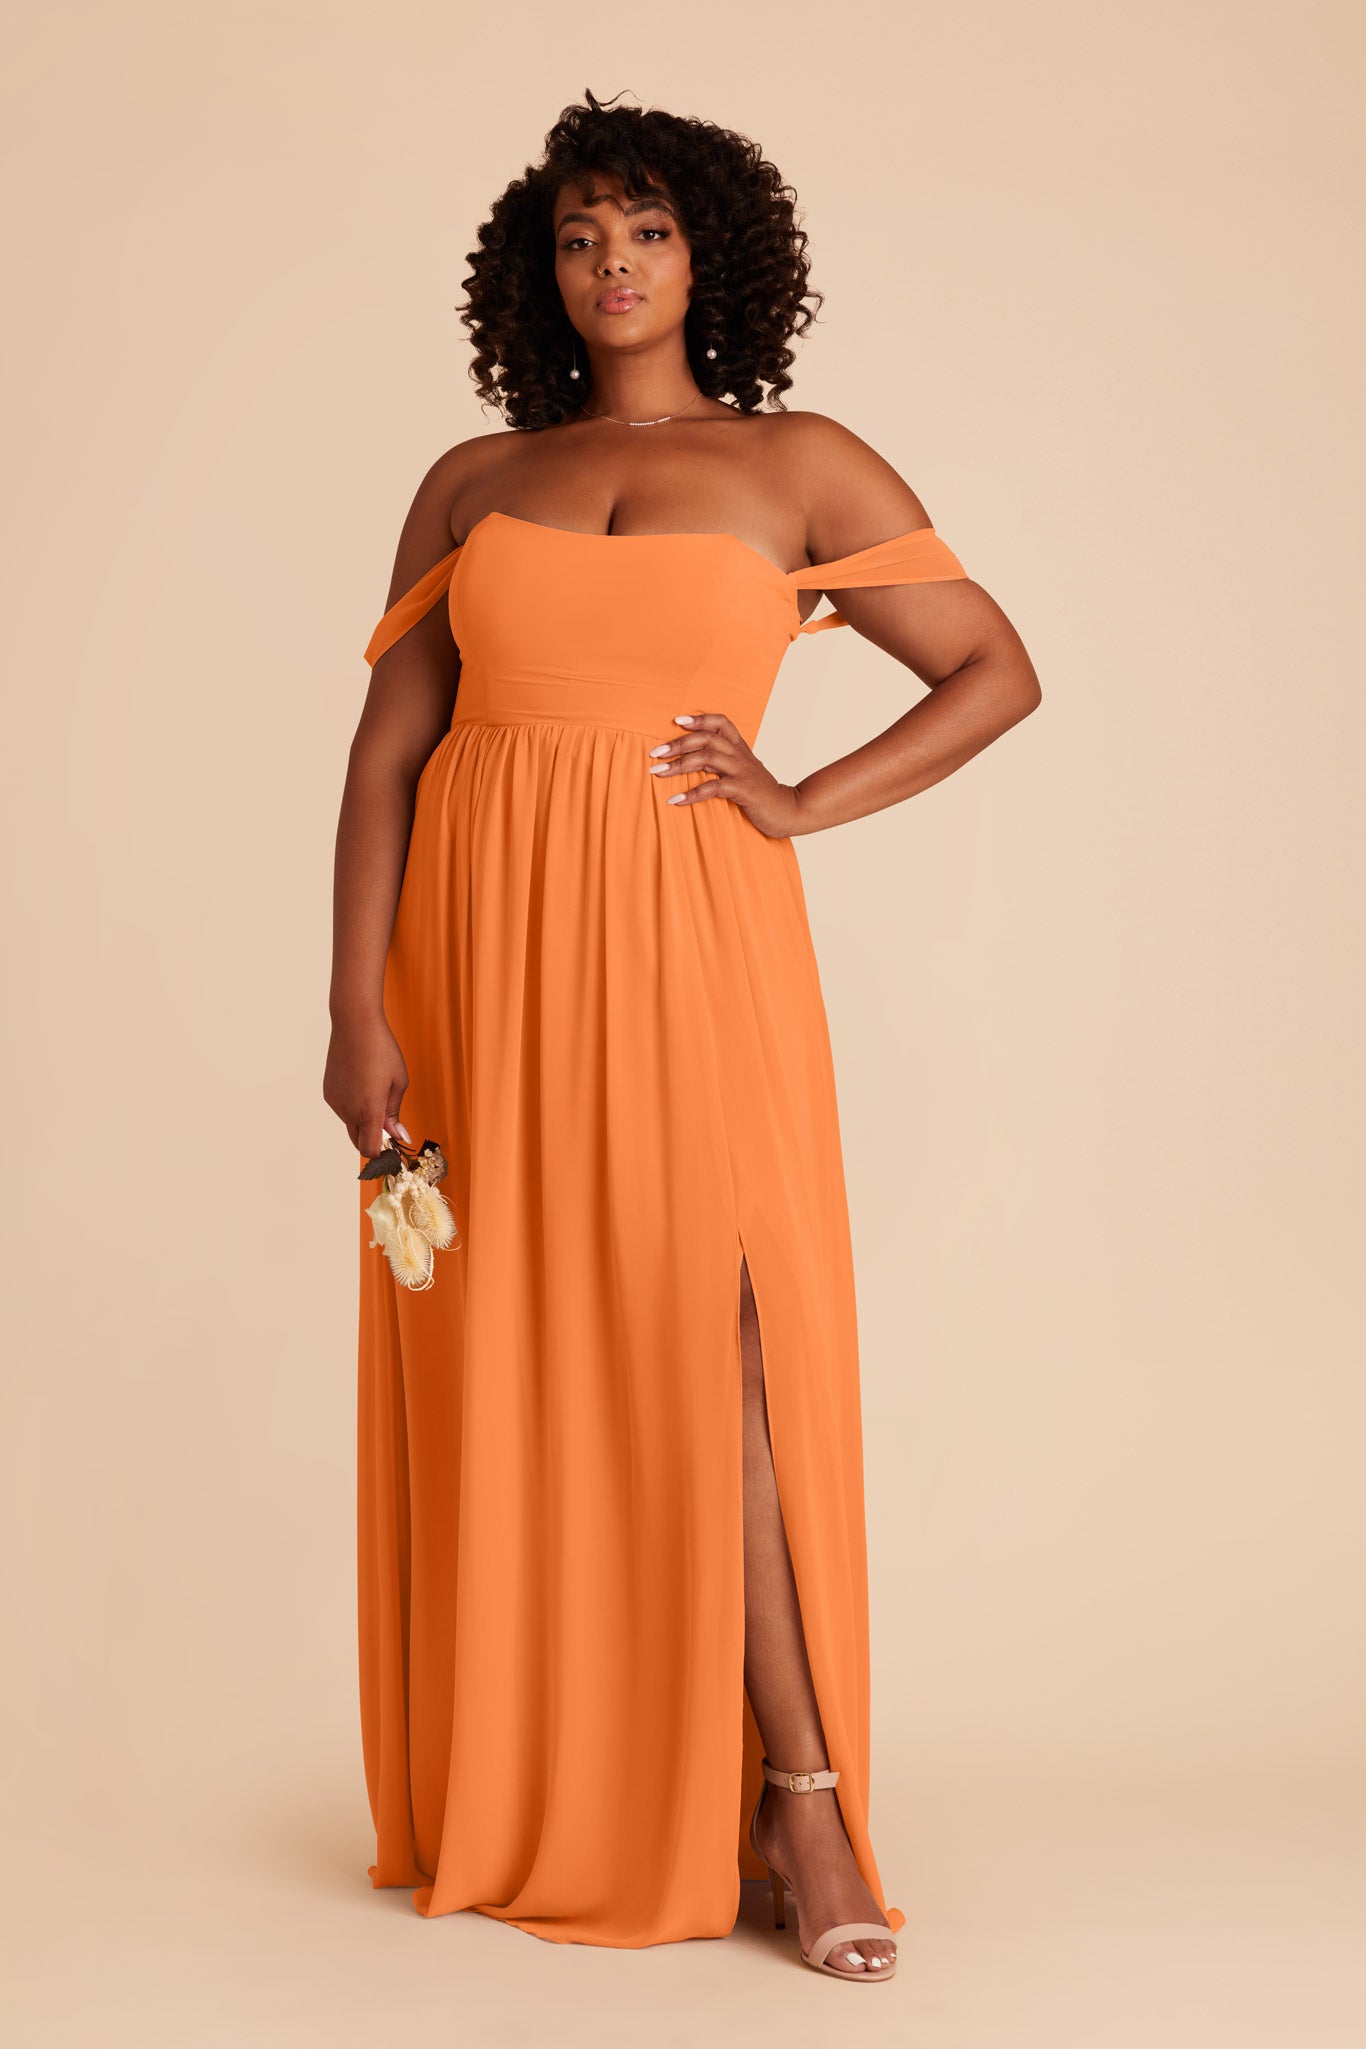 Apricot August Convertible Dress by Birdy Grey